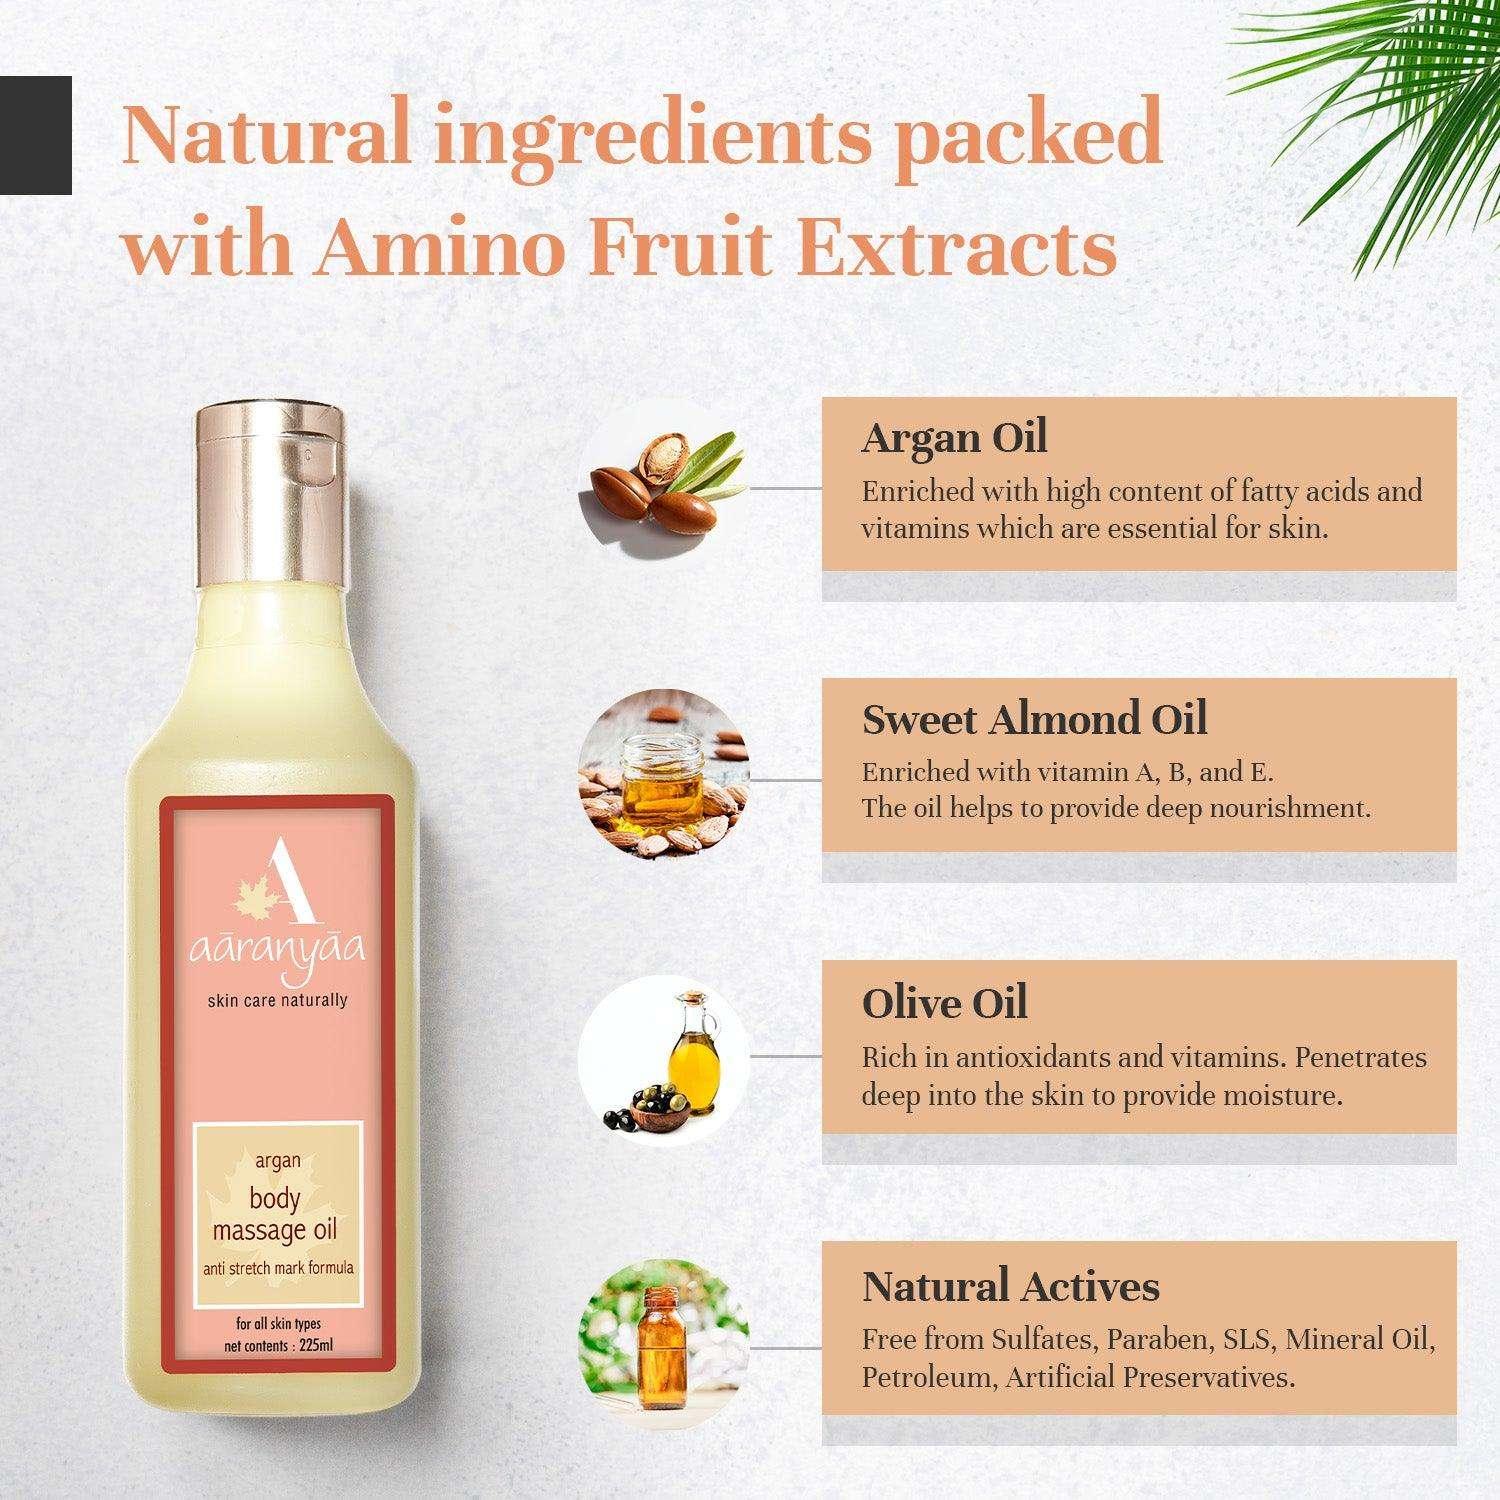 Body Massage Oil for Stretch Marks - aaranyaa skincare